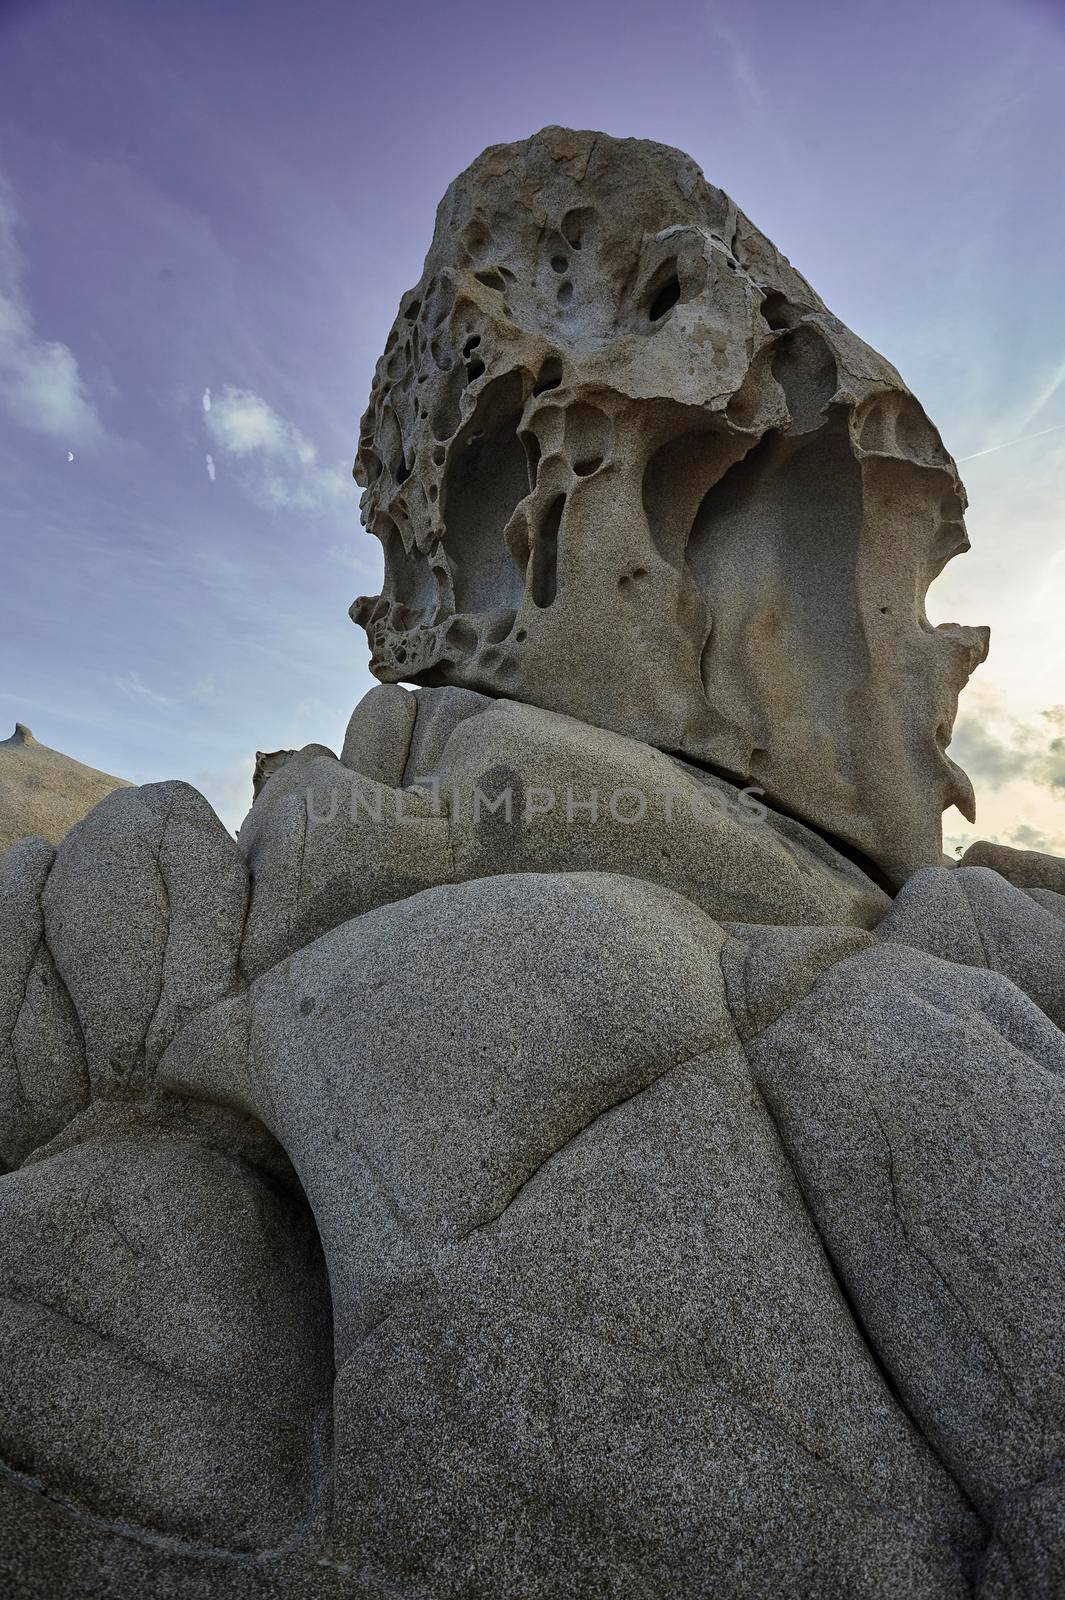 Particular granite rocks modeled and sculpted by the sea and the bad weather on the southern coast of Sardinia. Location Punta Molentis